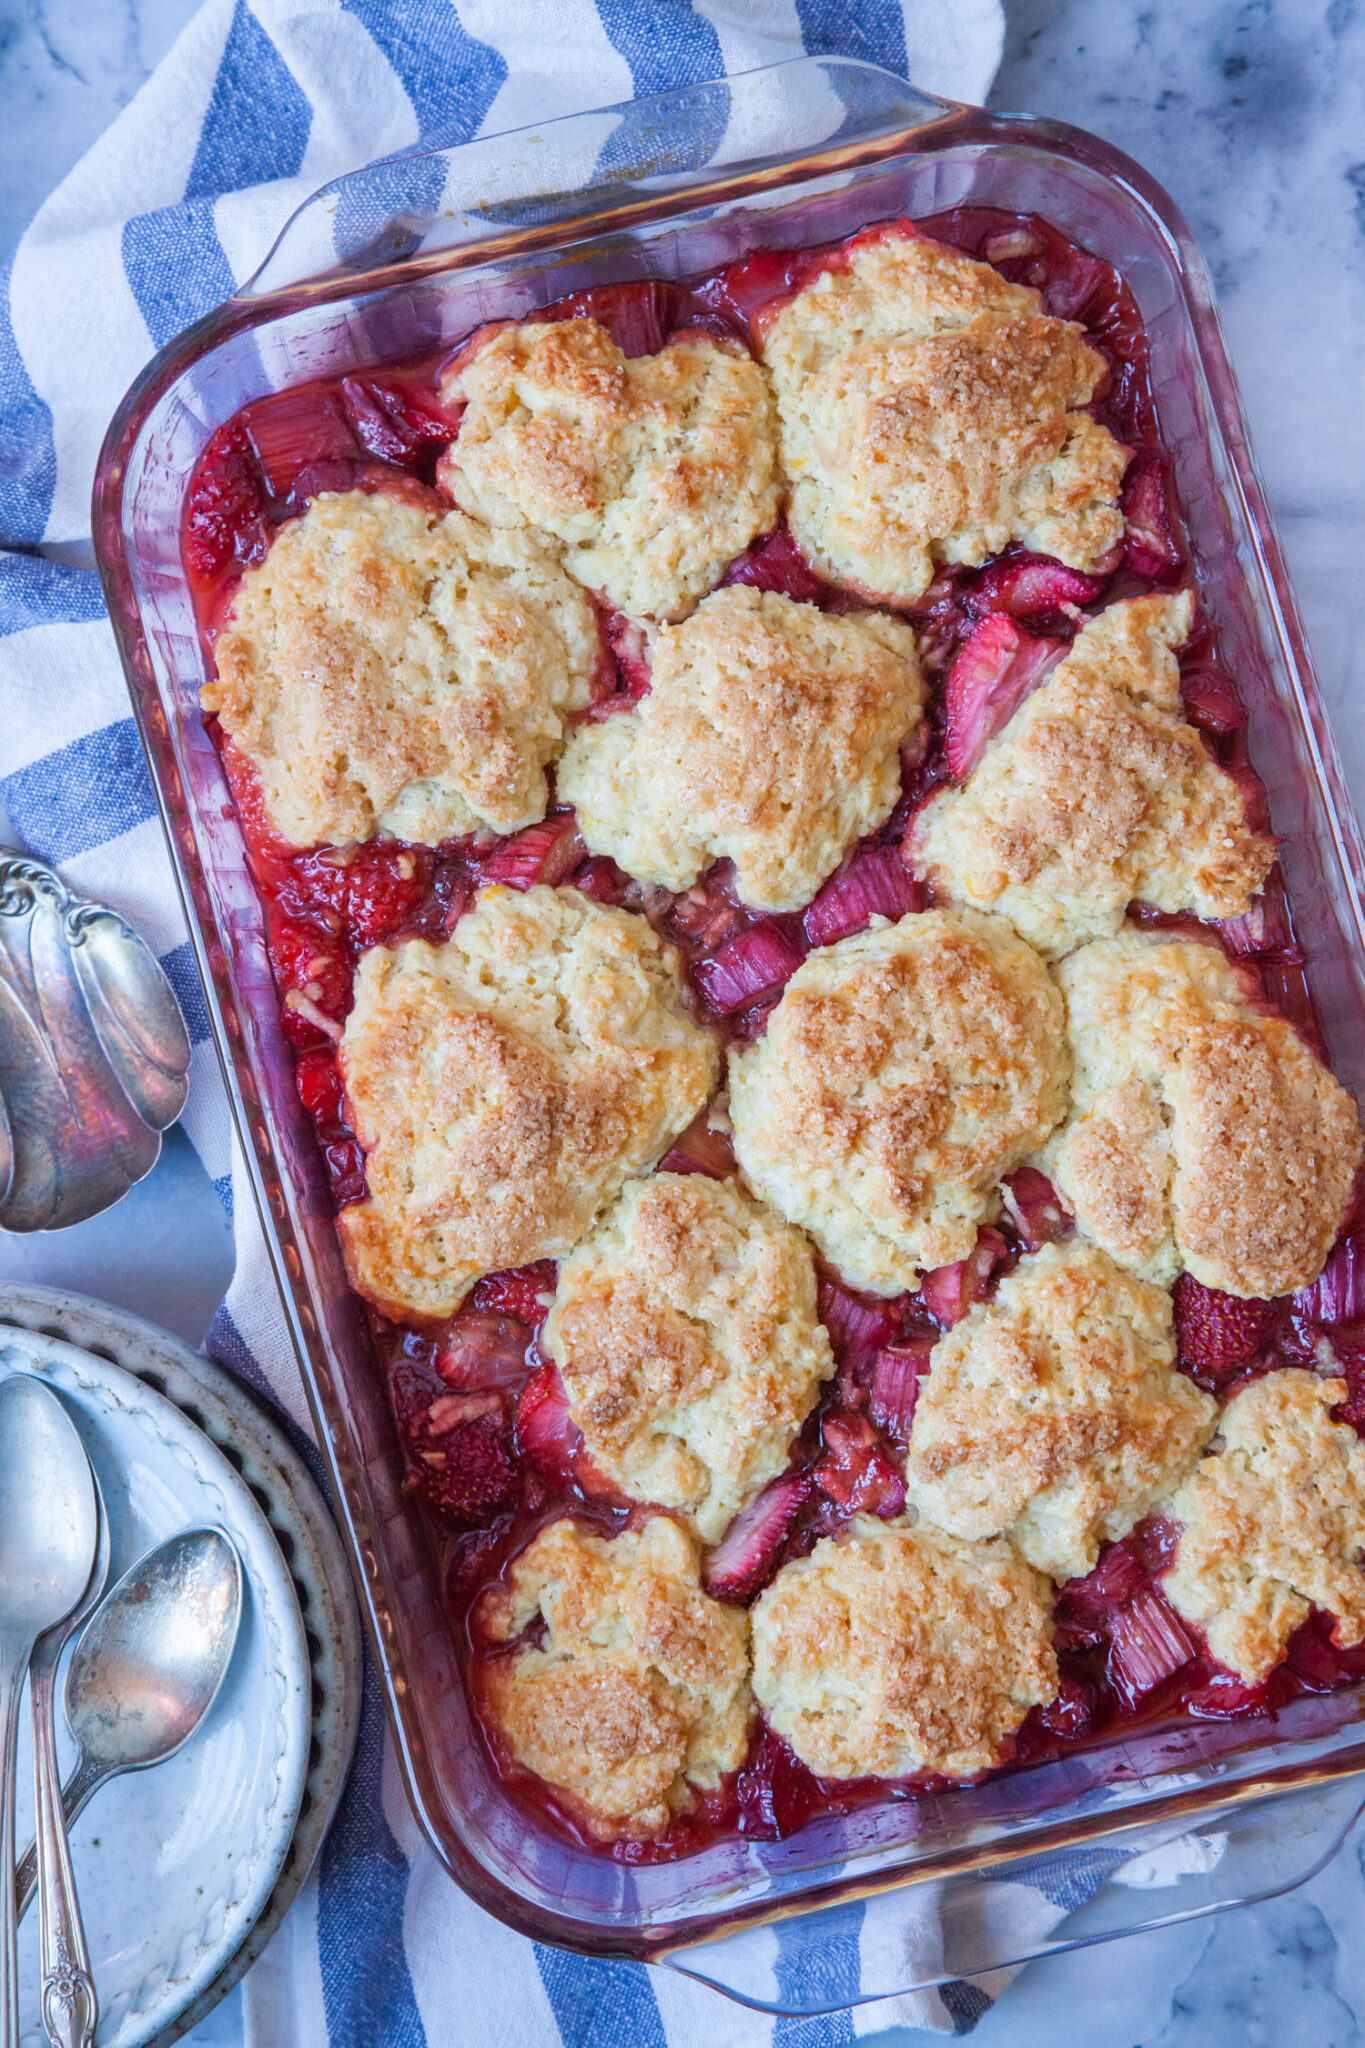 Strawberry Rhubarb Cobbler with fluffy biscuits in a glass casserole dish sitting on a blue striped cloth napkin.